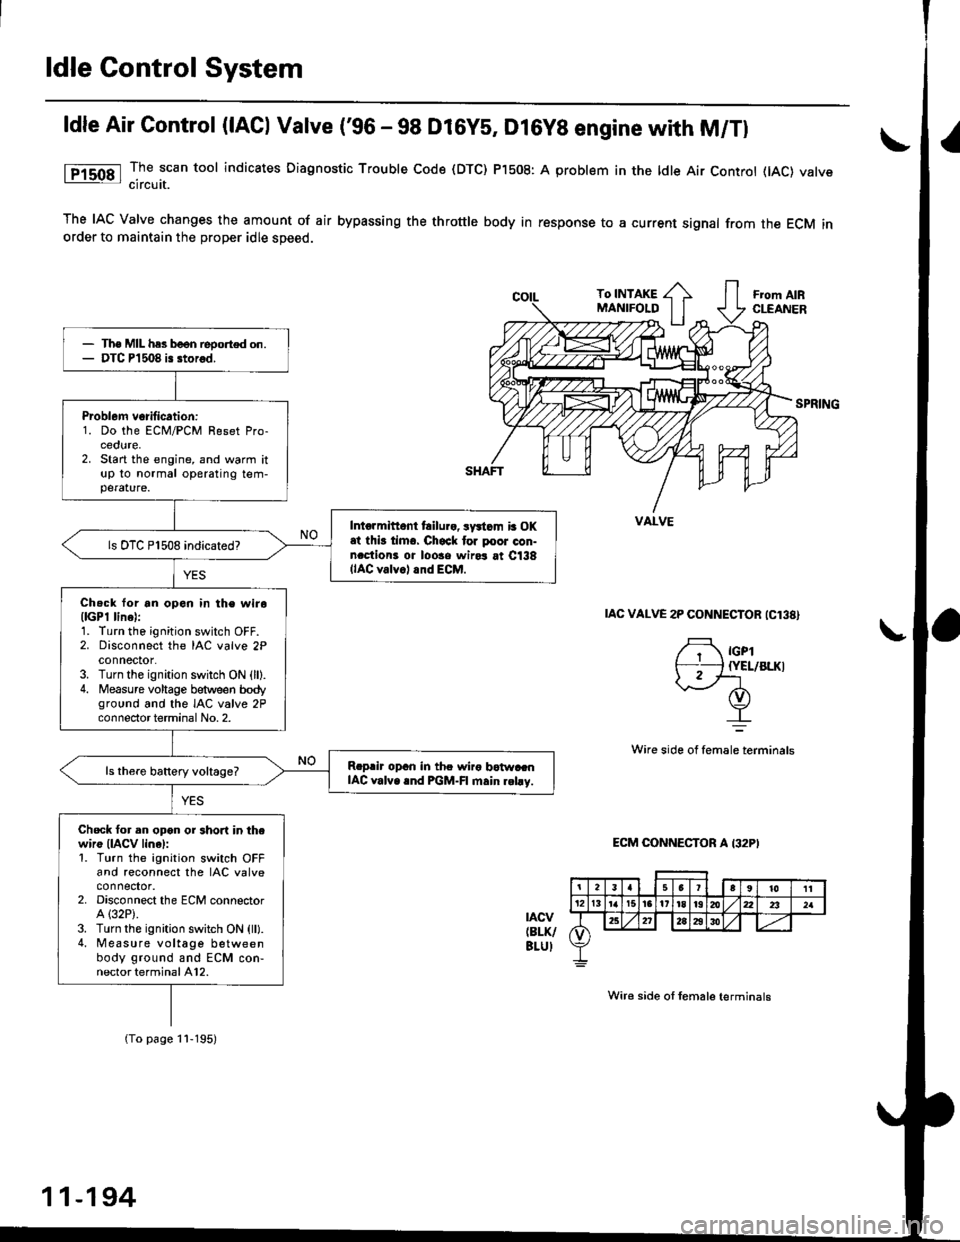 HONDA CIVIC 1996 6.G Owners Manual ldle Control System
ldle Air Control (lACl Vatve (96 - 98 Dl6ys, Dl6yB engine with M/Tl
The scan tool indicates Diagnostic Trouble Code (DTC) P1508: A problem in the ldle Air Controt flAC) varvecircu